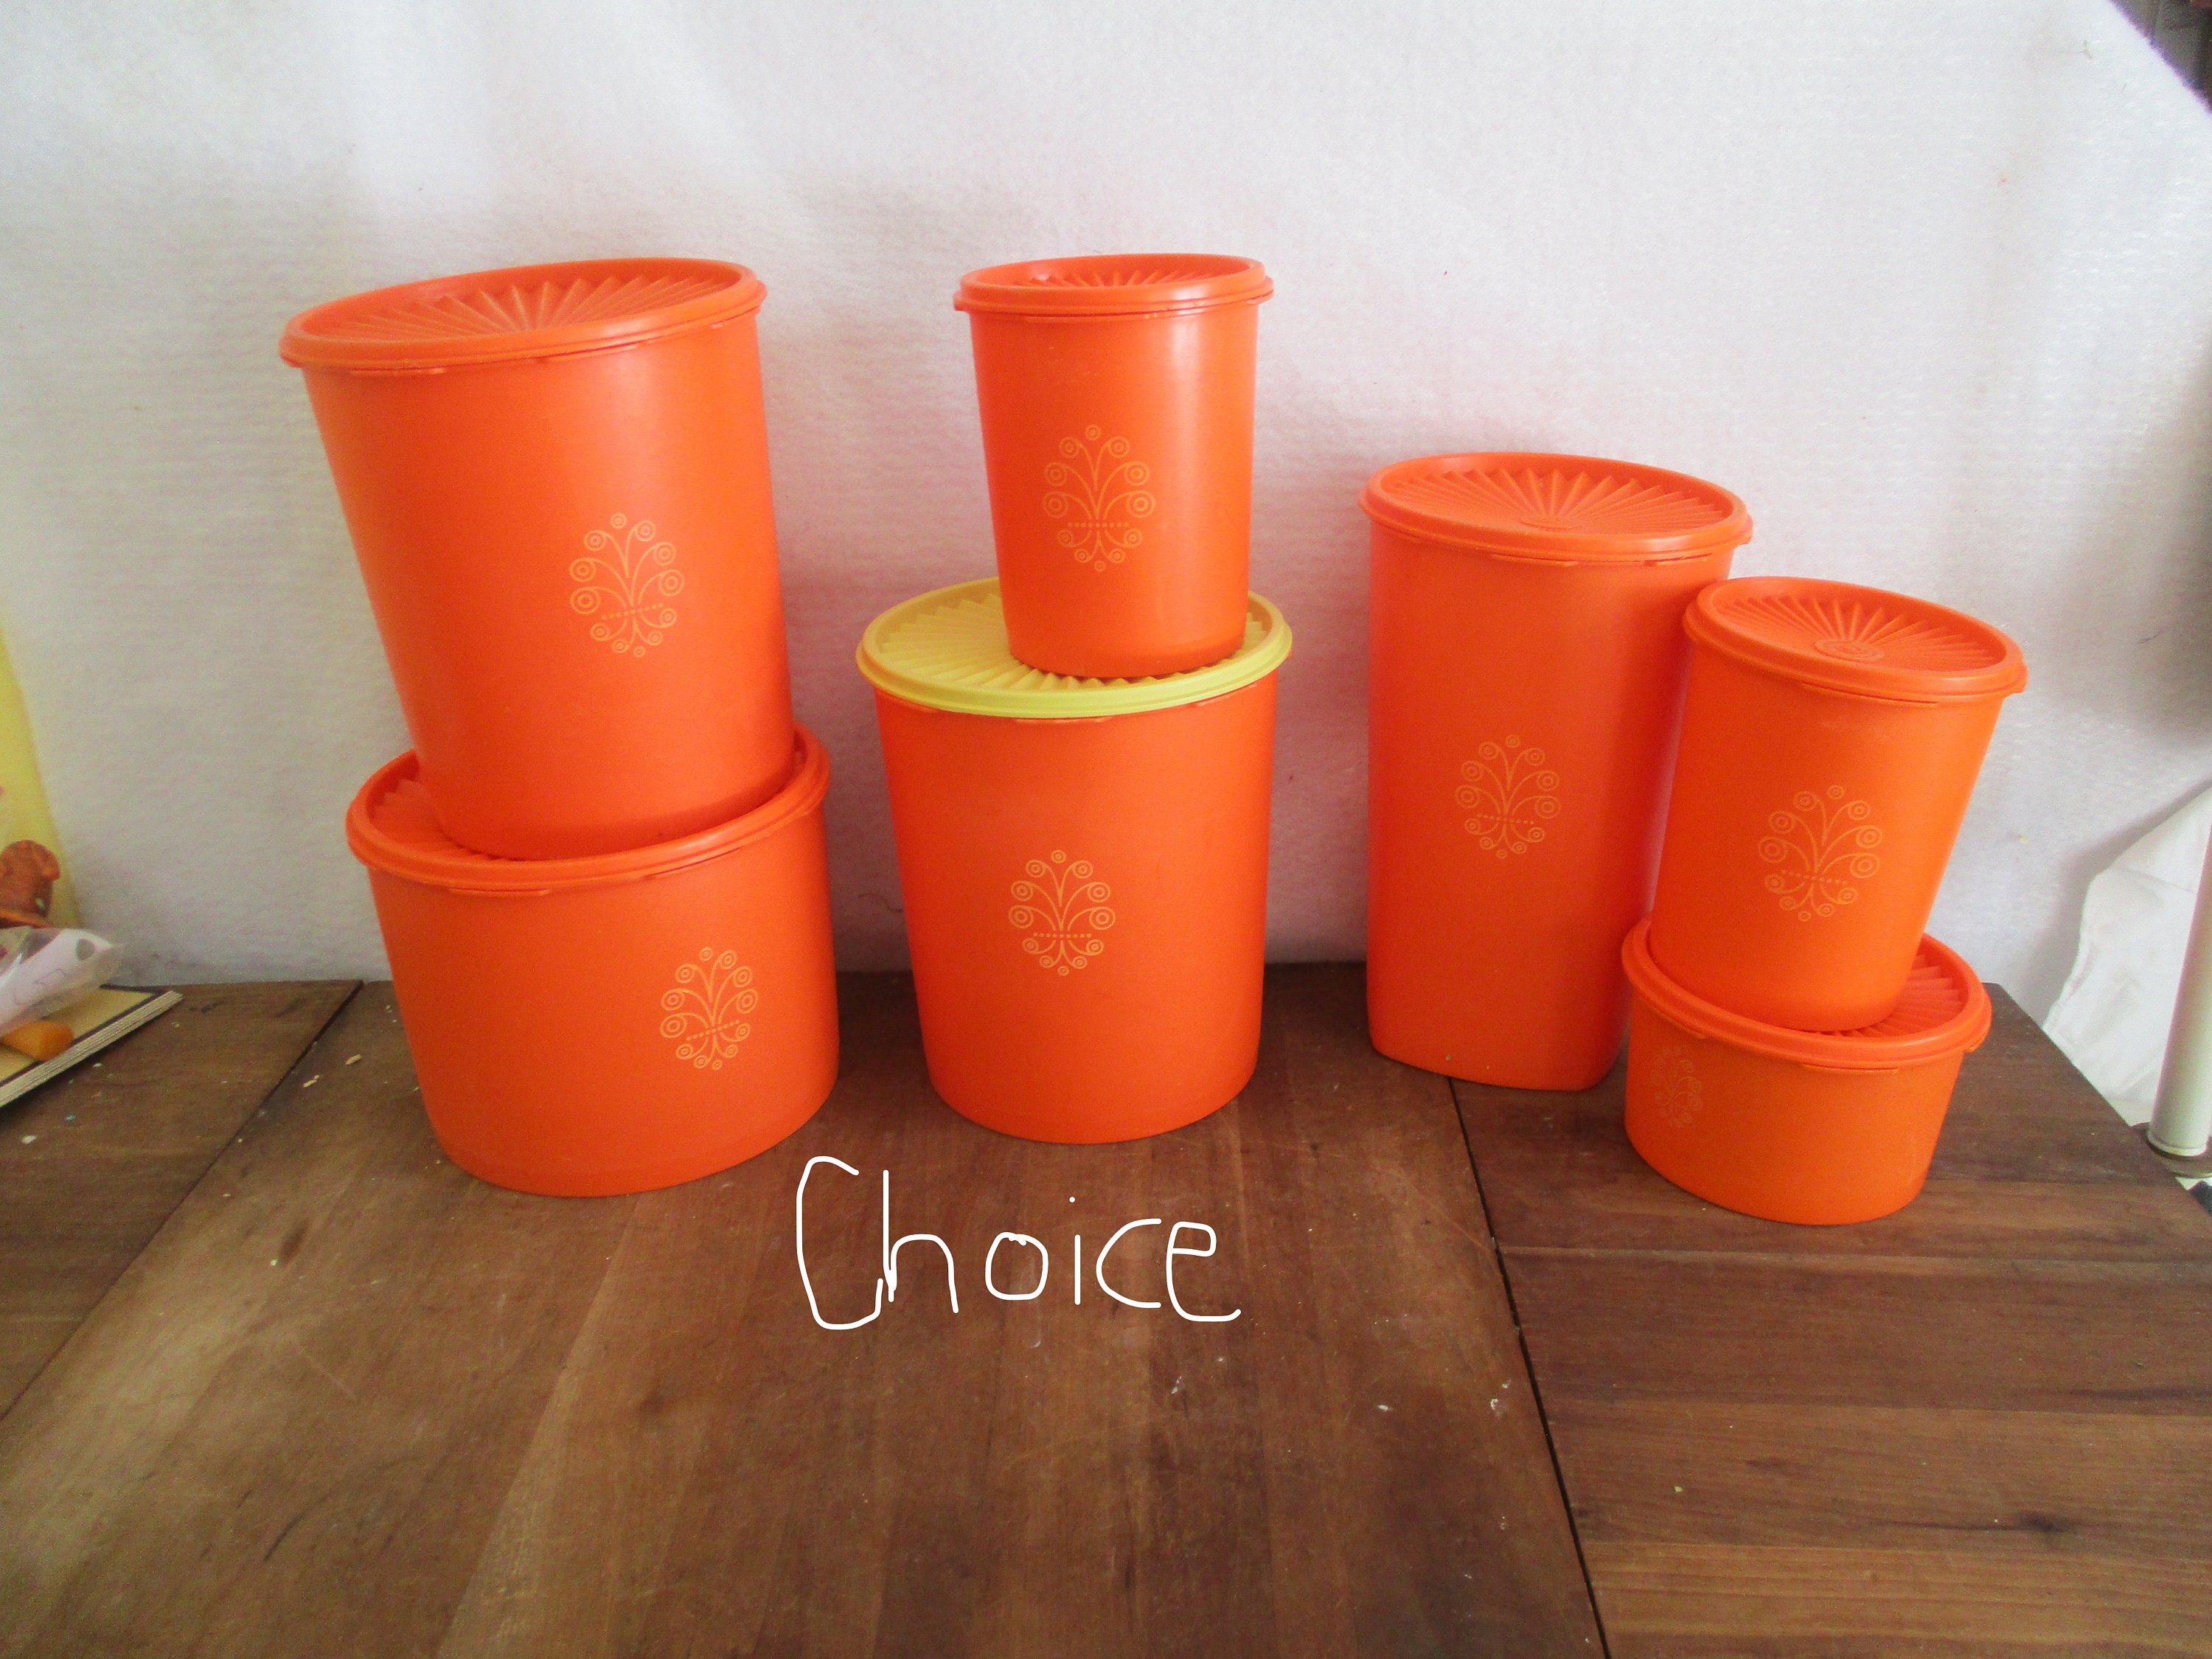 Vintage Orange Tupperware Canister set of 6 Canisters With Lids